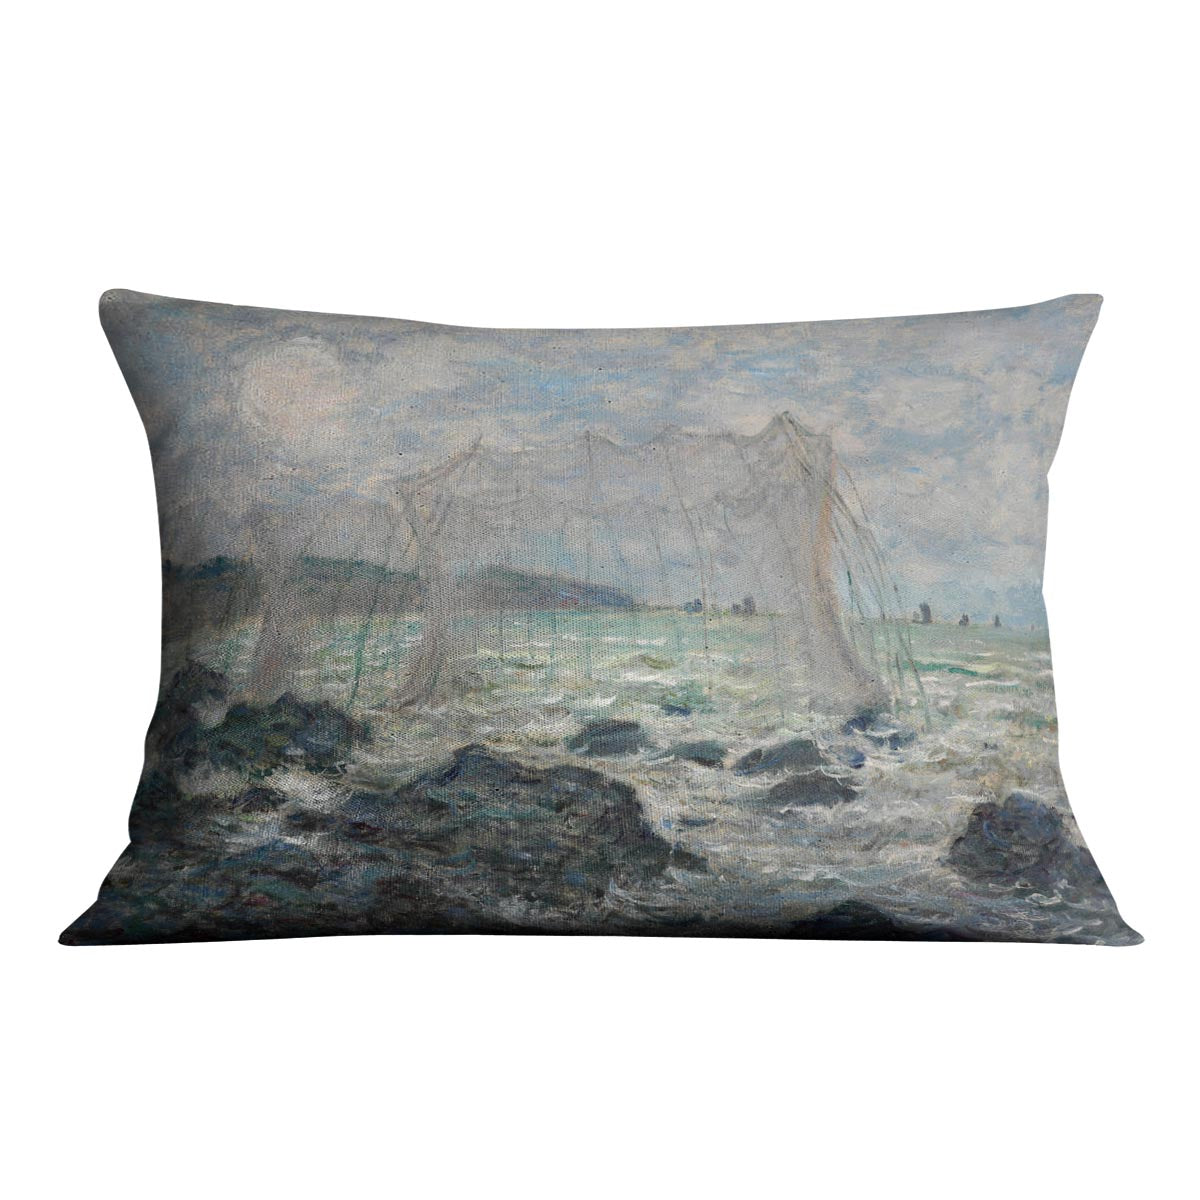 Fishing nets at Pourville by Monet Cushion